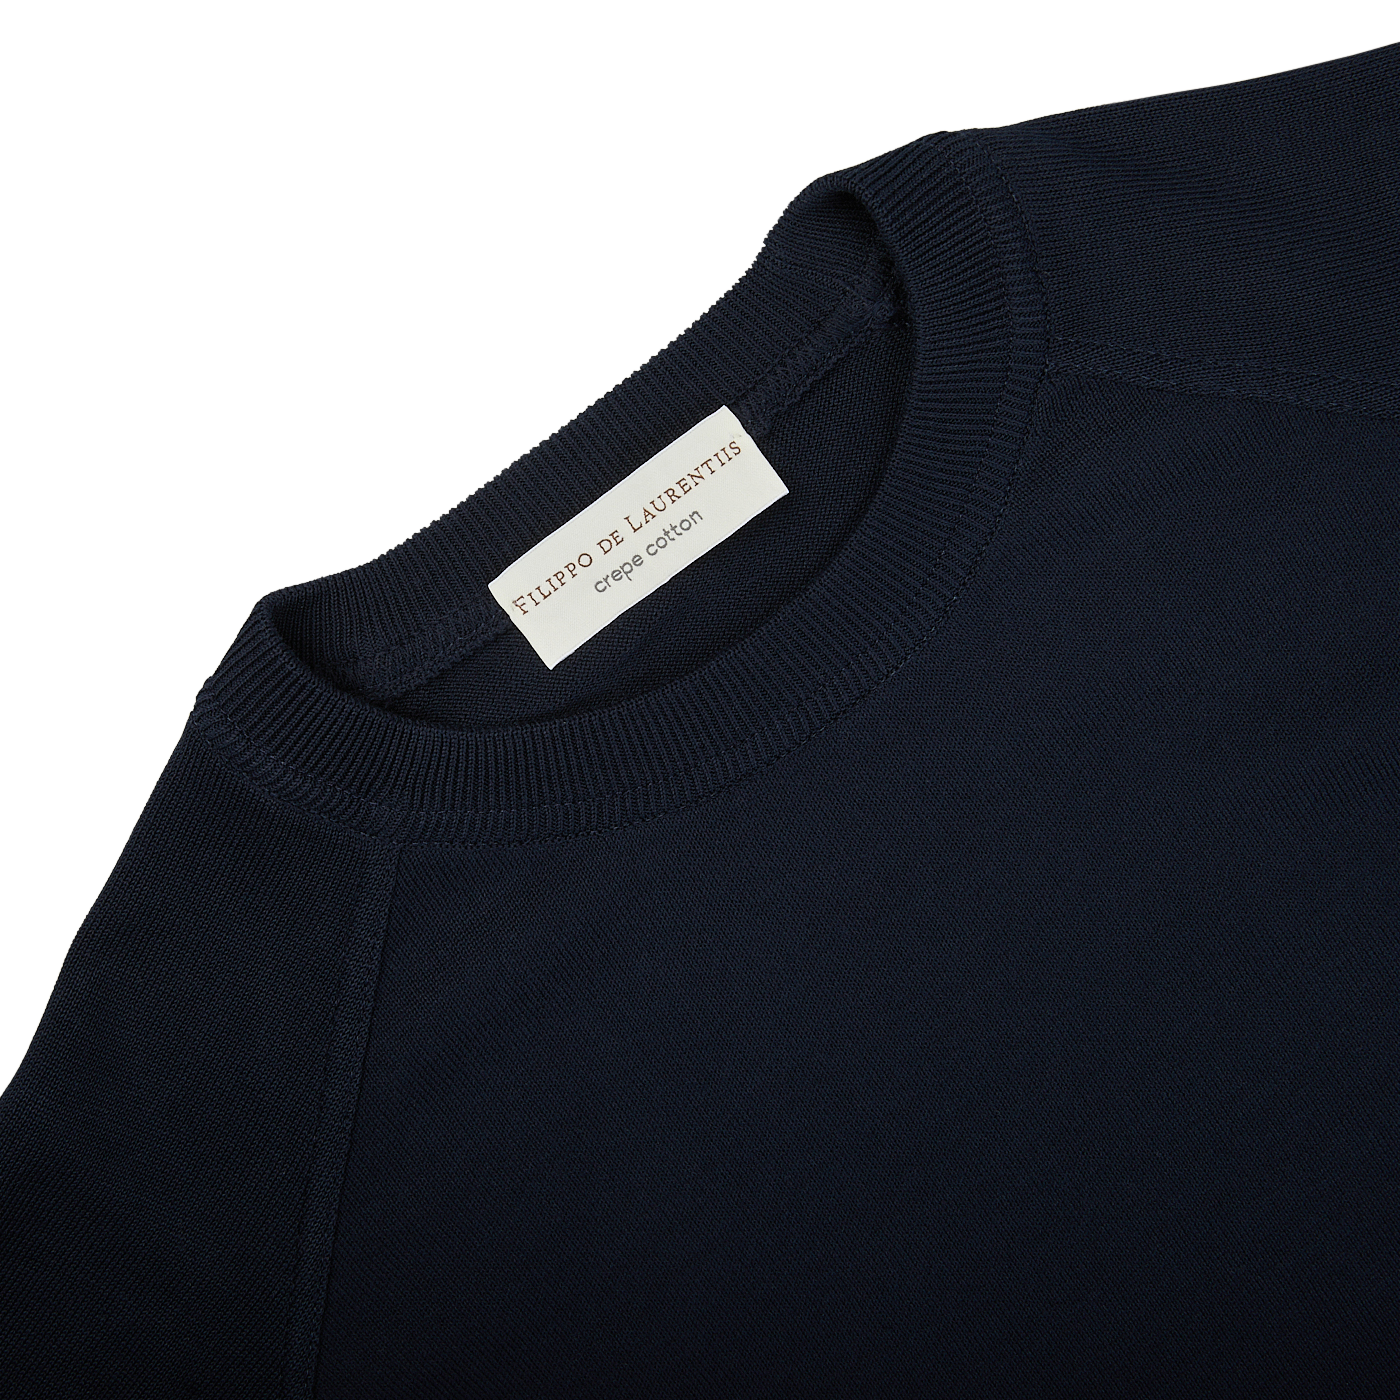 The back of a Filippo de Laurentiis navy blue crepe cotton crew neck sweater with a label on it.